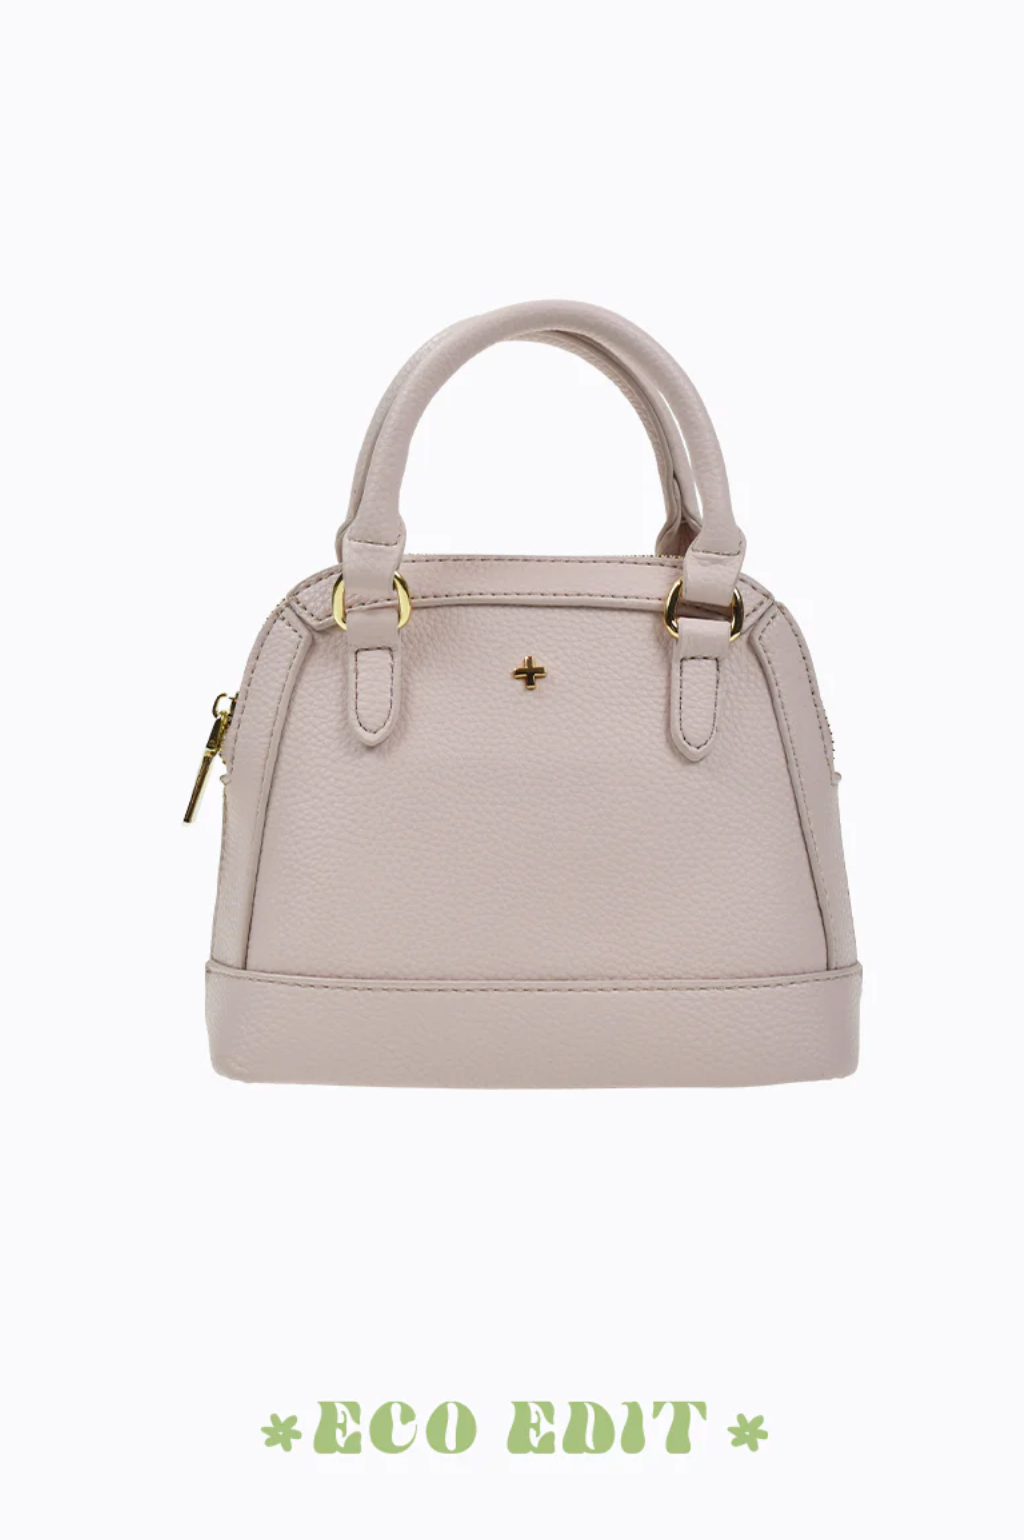 Brielle bag is a white vegan leather mini bowling bag by peta and jain now online at Jipsi cartel